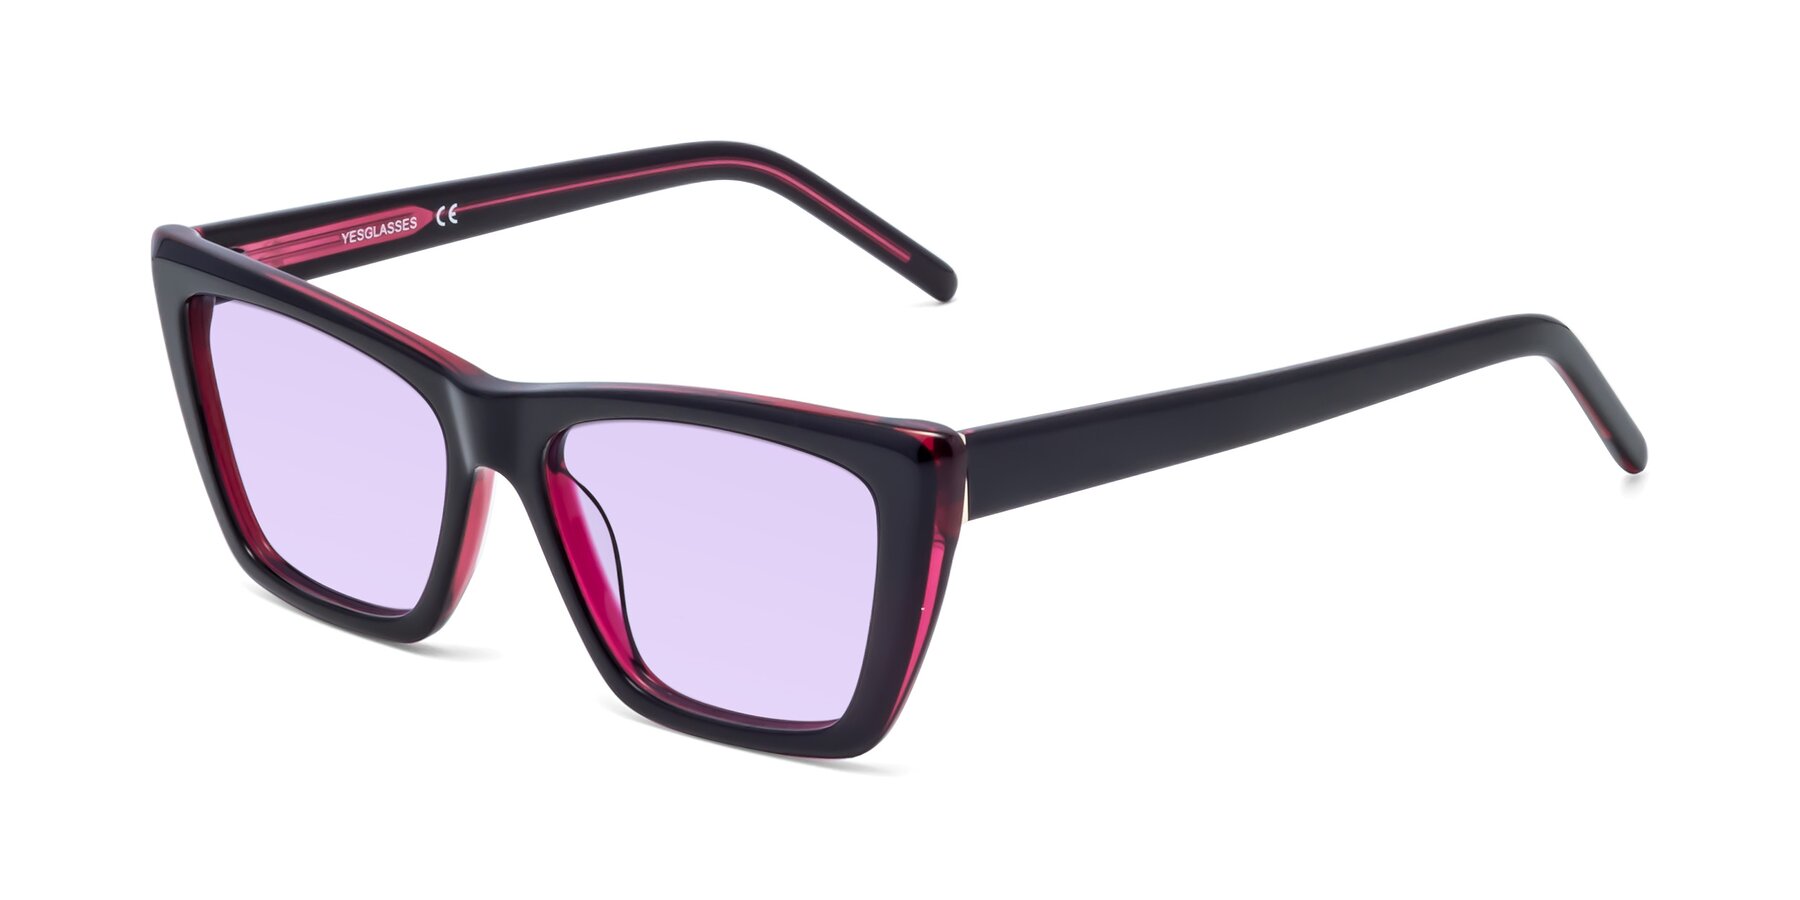 Angle of 1494 in Black-Wine with Light Purple Tinted Lenses